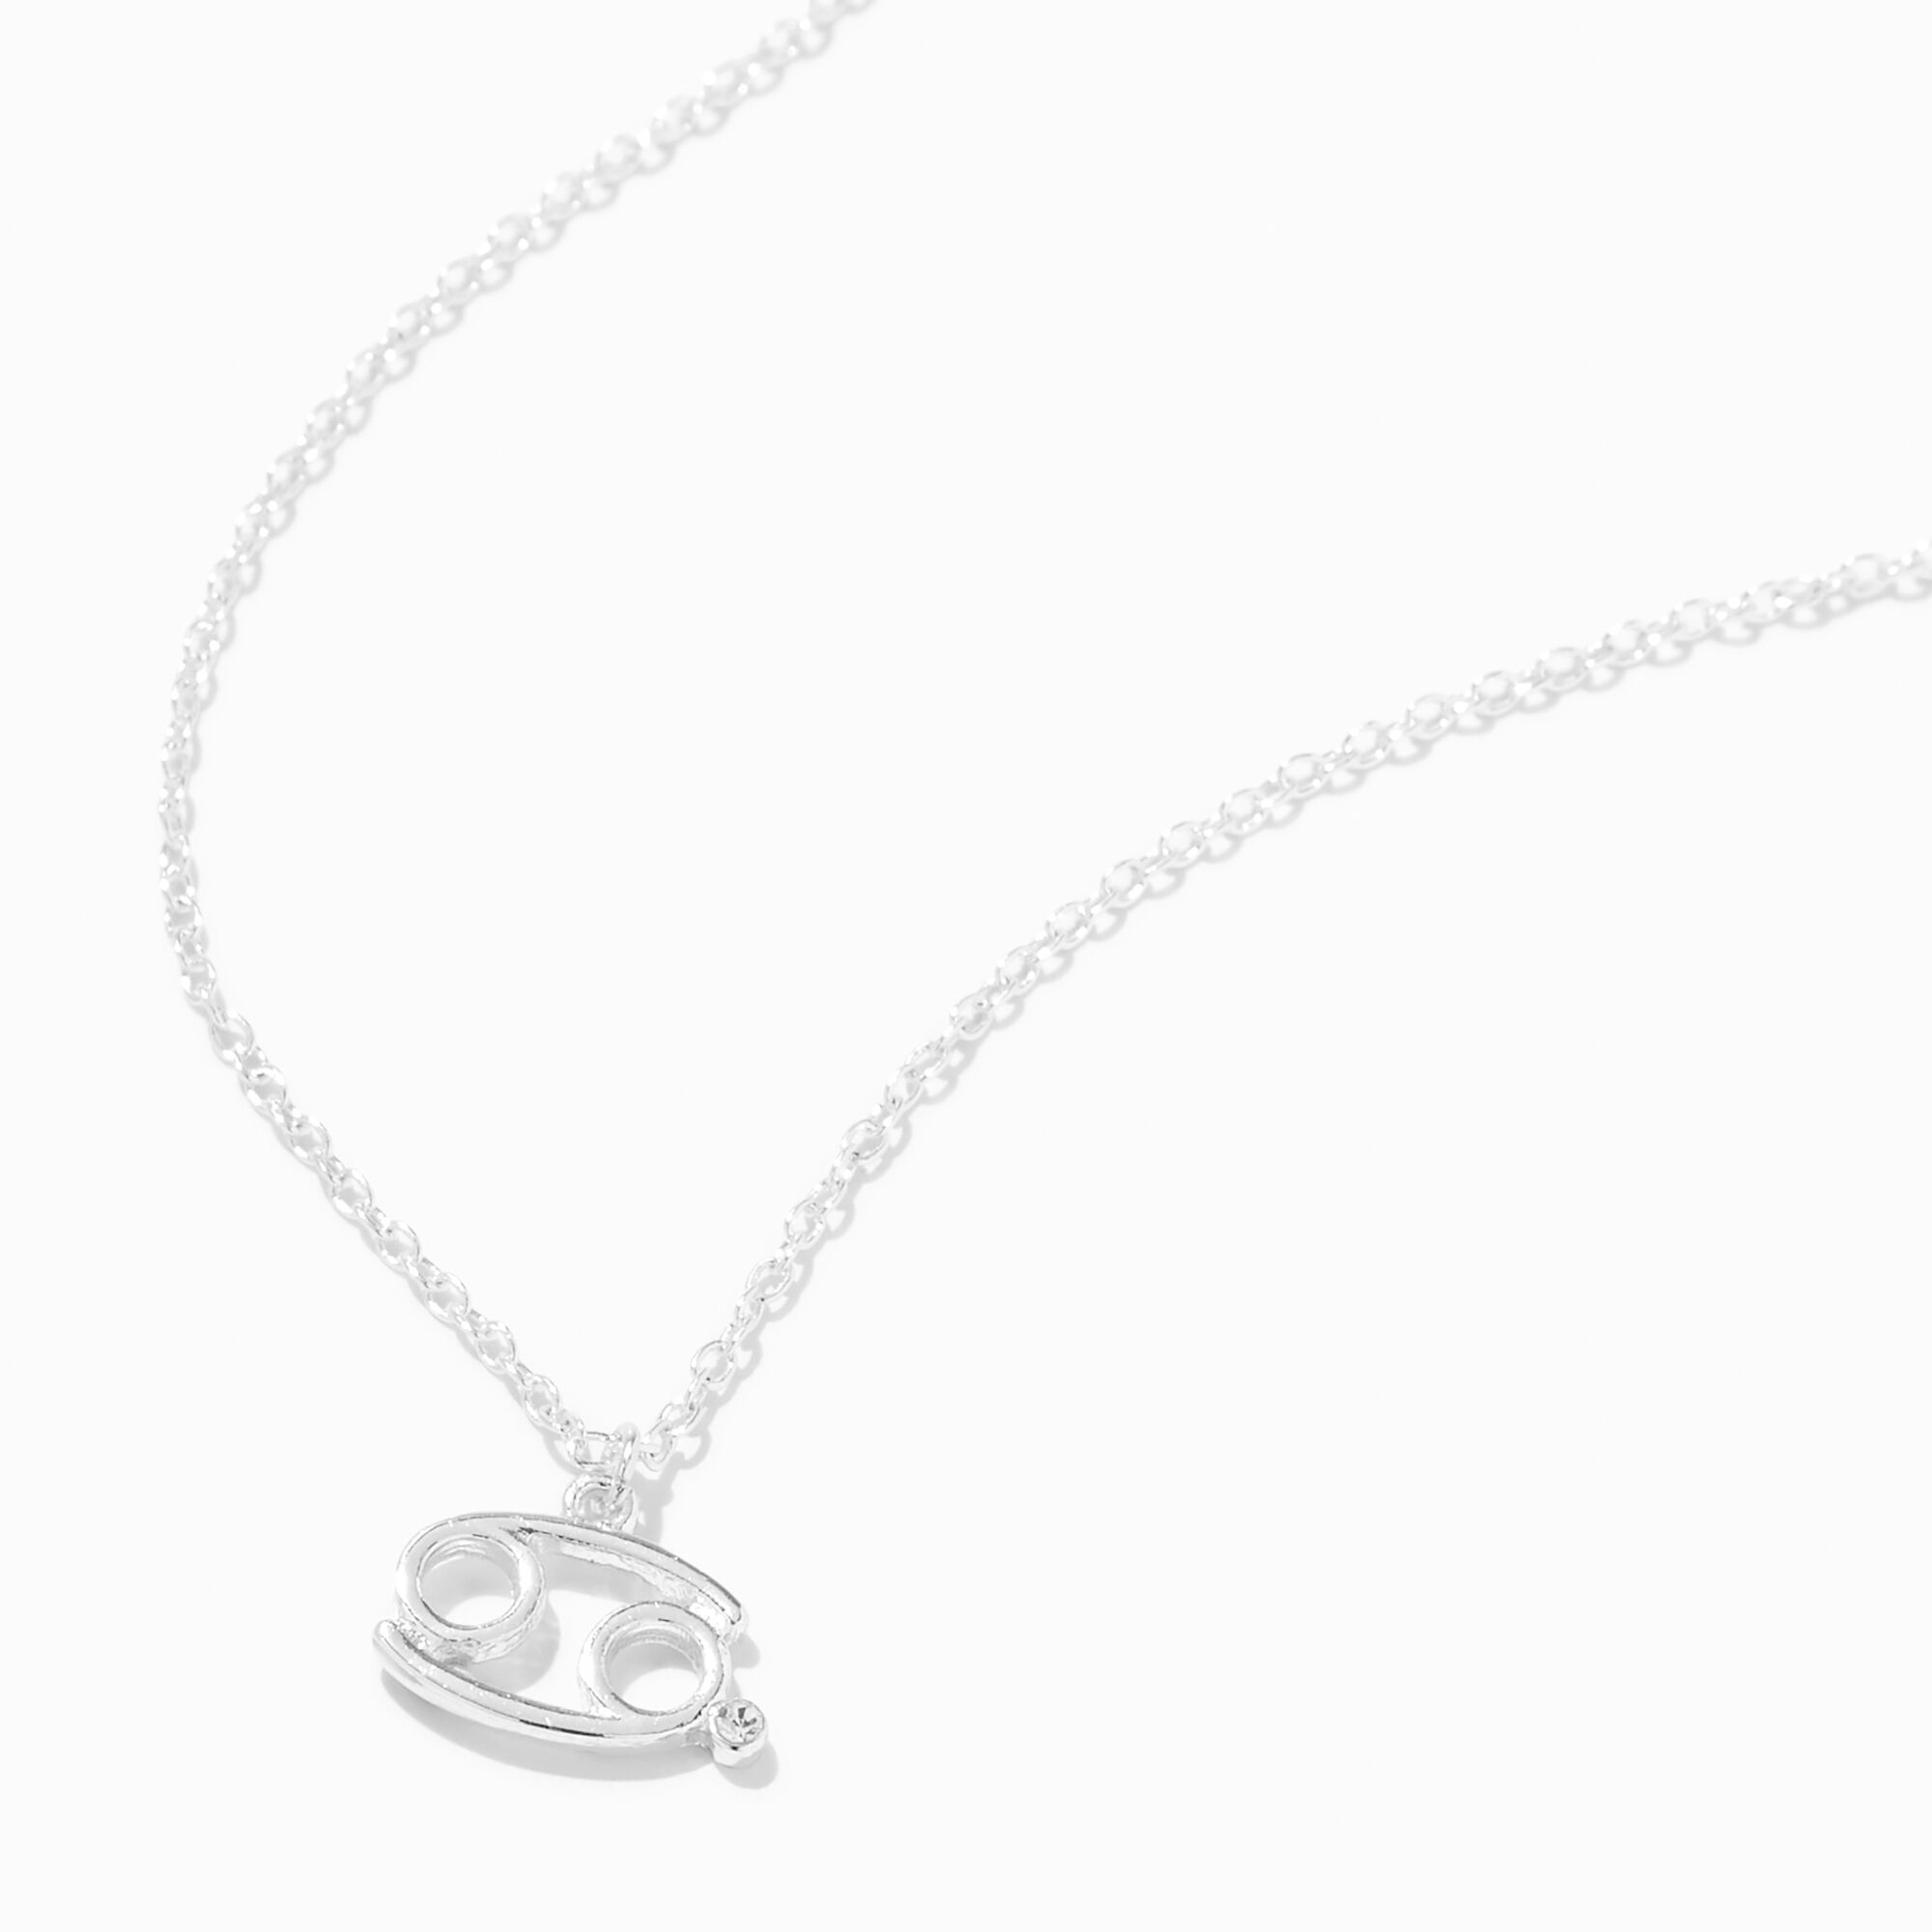 View Claires Tone Cystal Zodiac Symbol Pendant Necklace Cancer Silver information